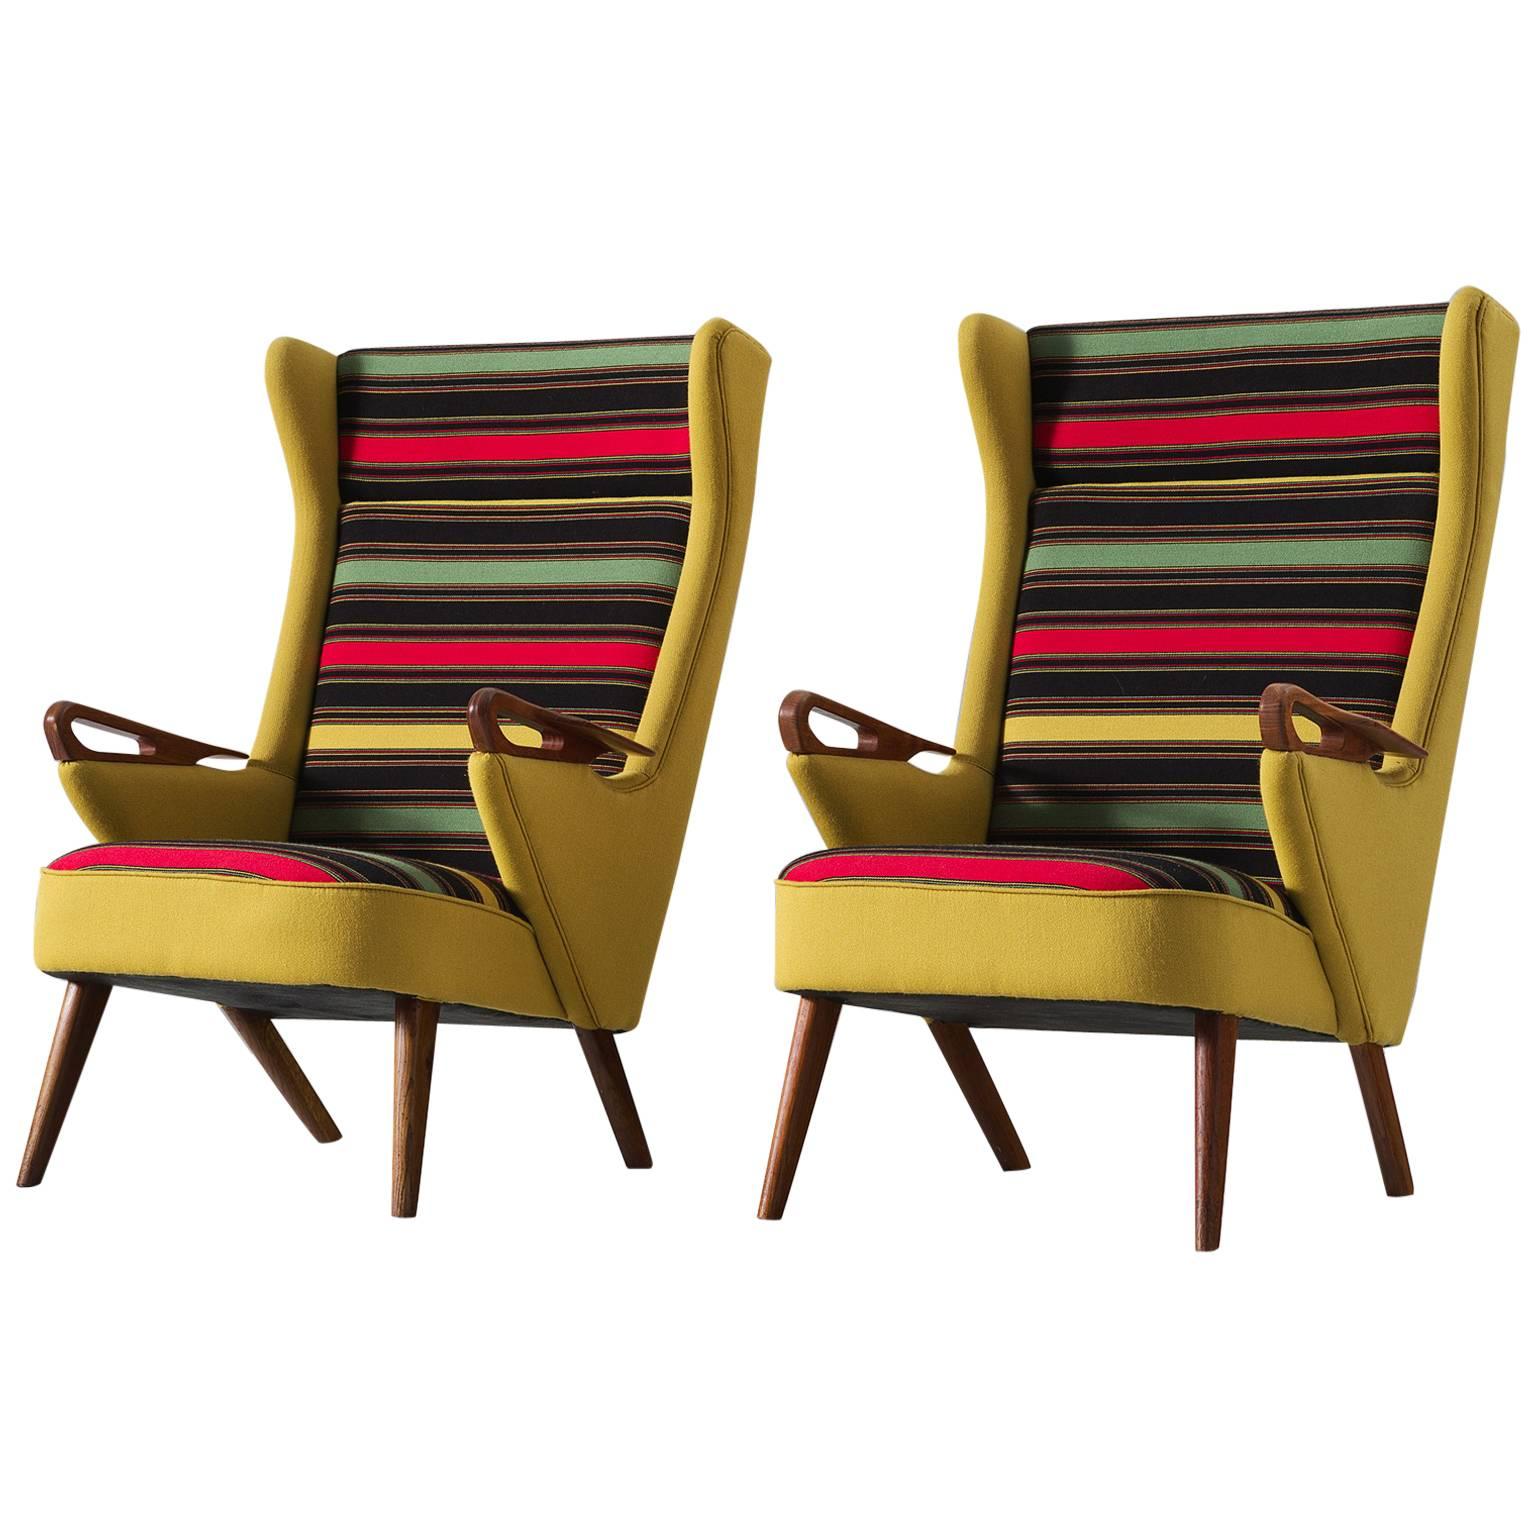 Colorful Pair of Danish Reupholstered Highback Chairs